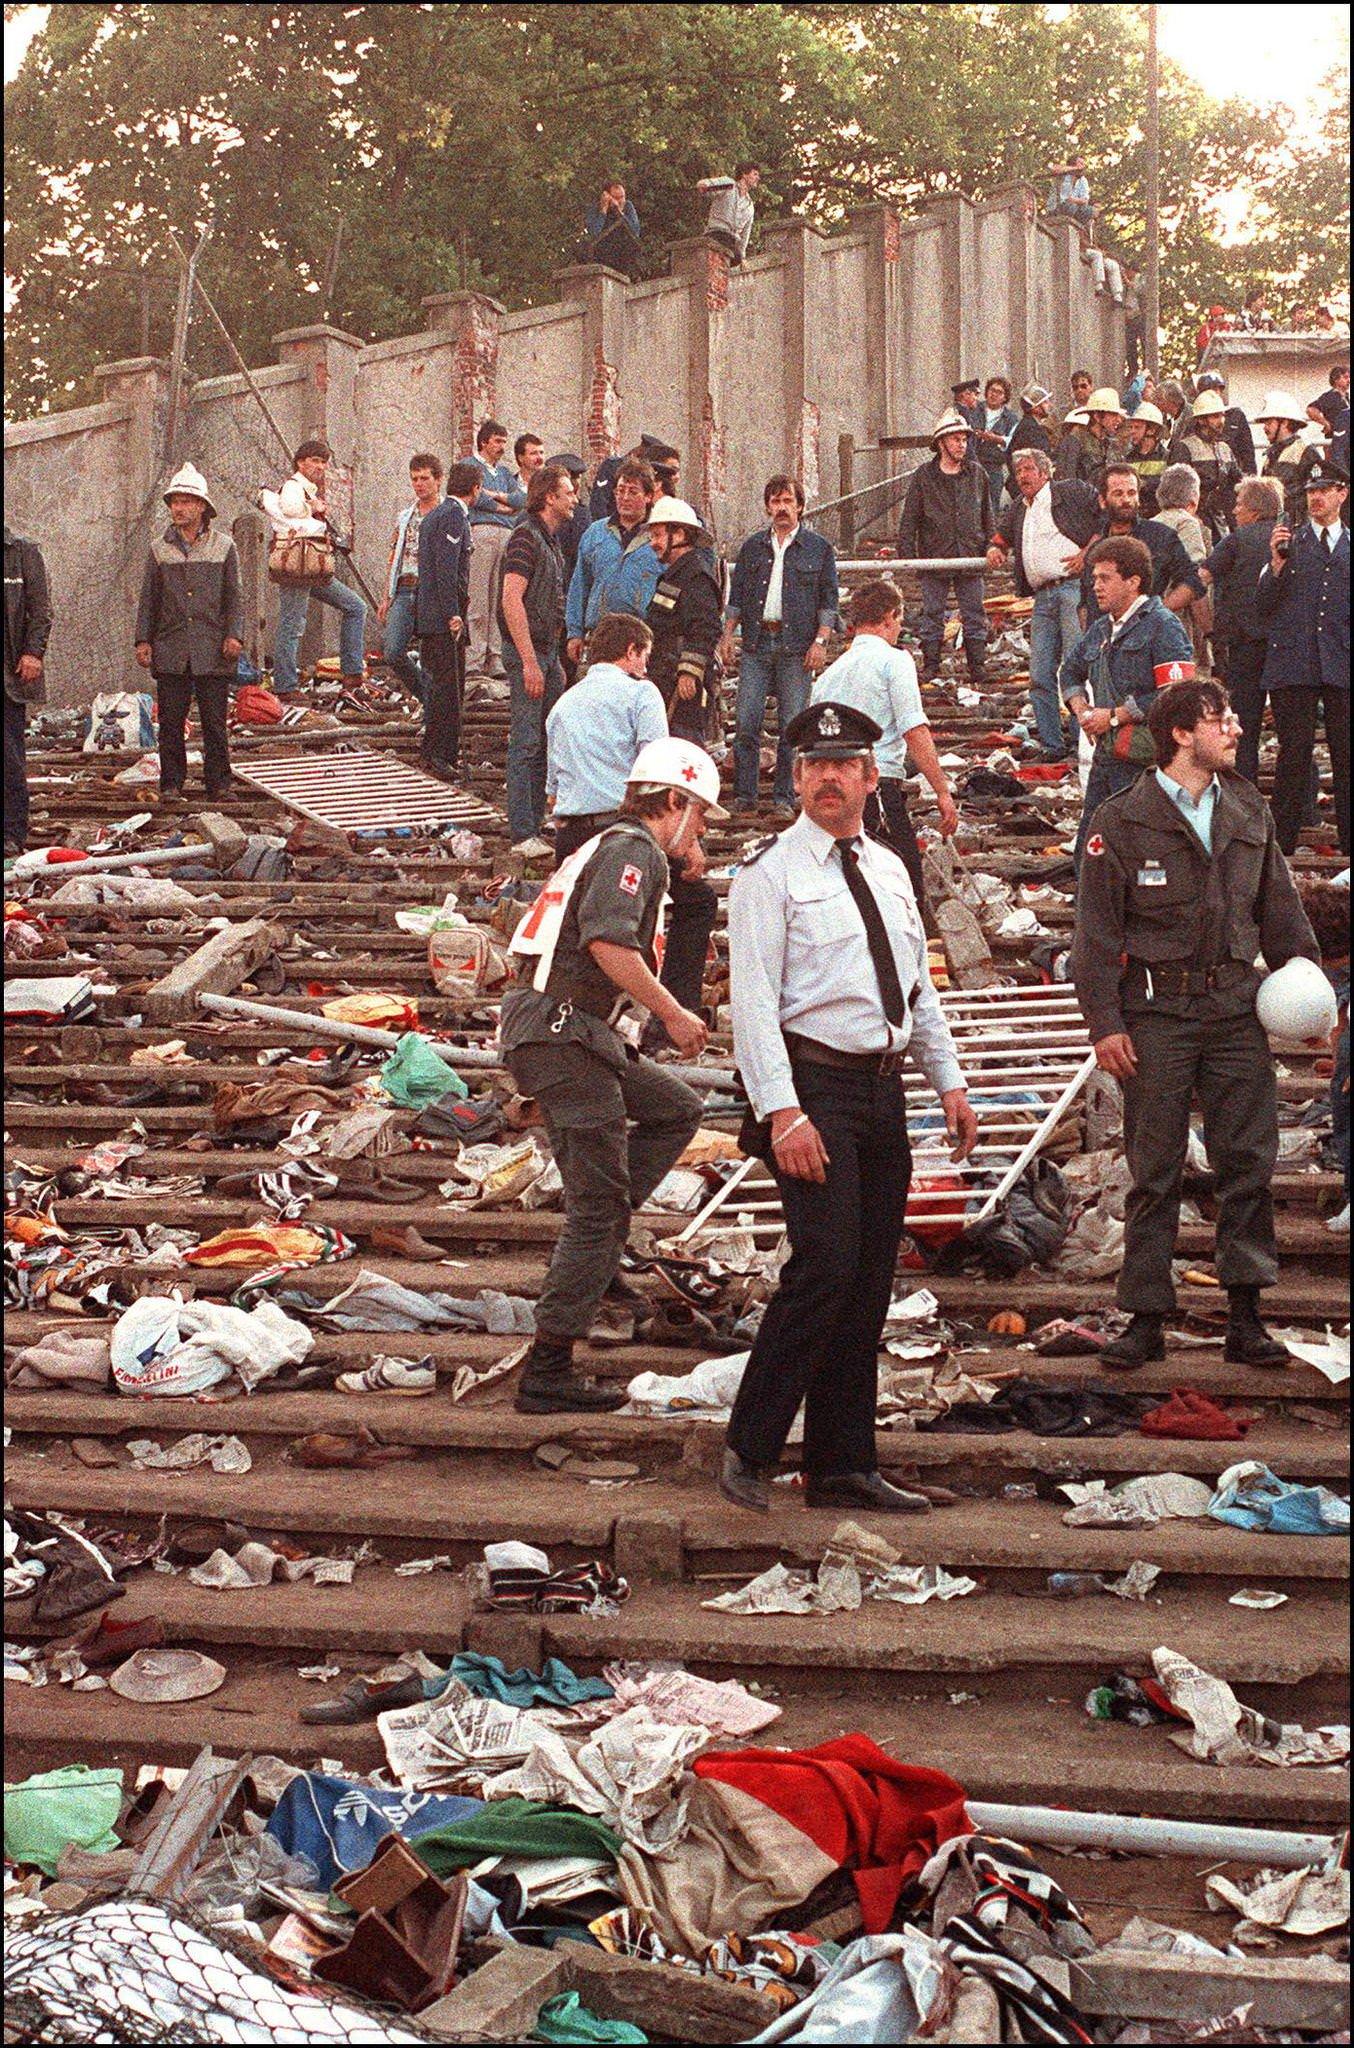 Rescuers search for victims after Heysel Stadium riots, European Cup Final, 1985.